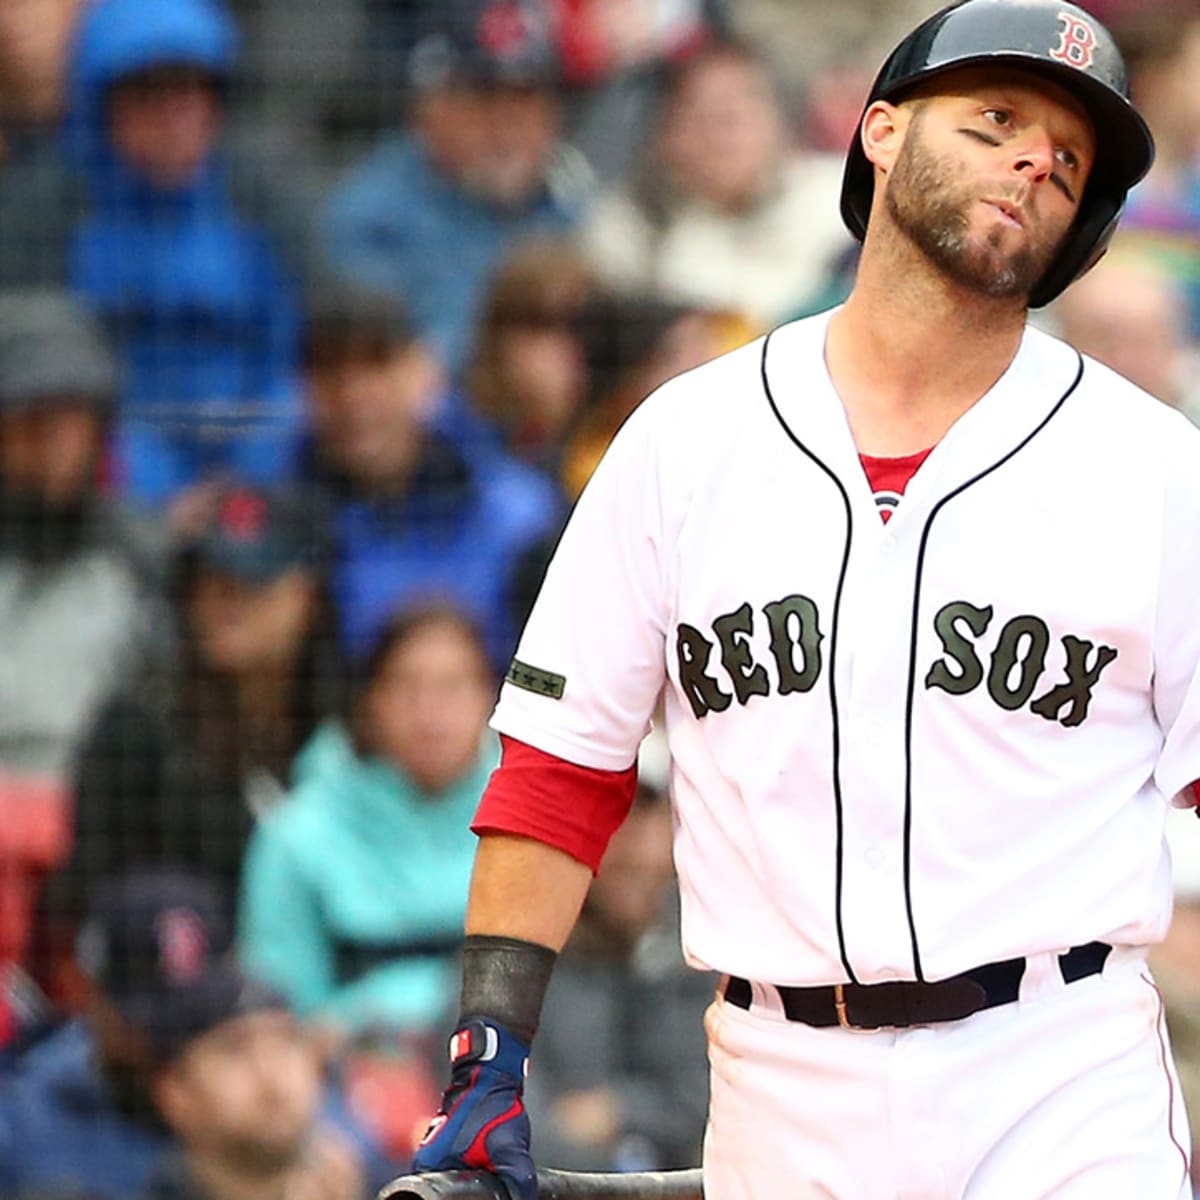 Dustin Pedroia return to DL: Red Sox 2B played just 3 games